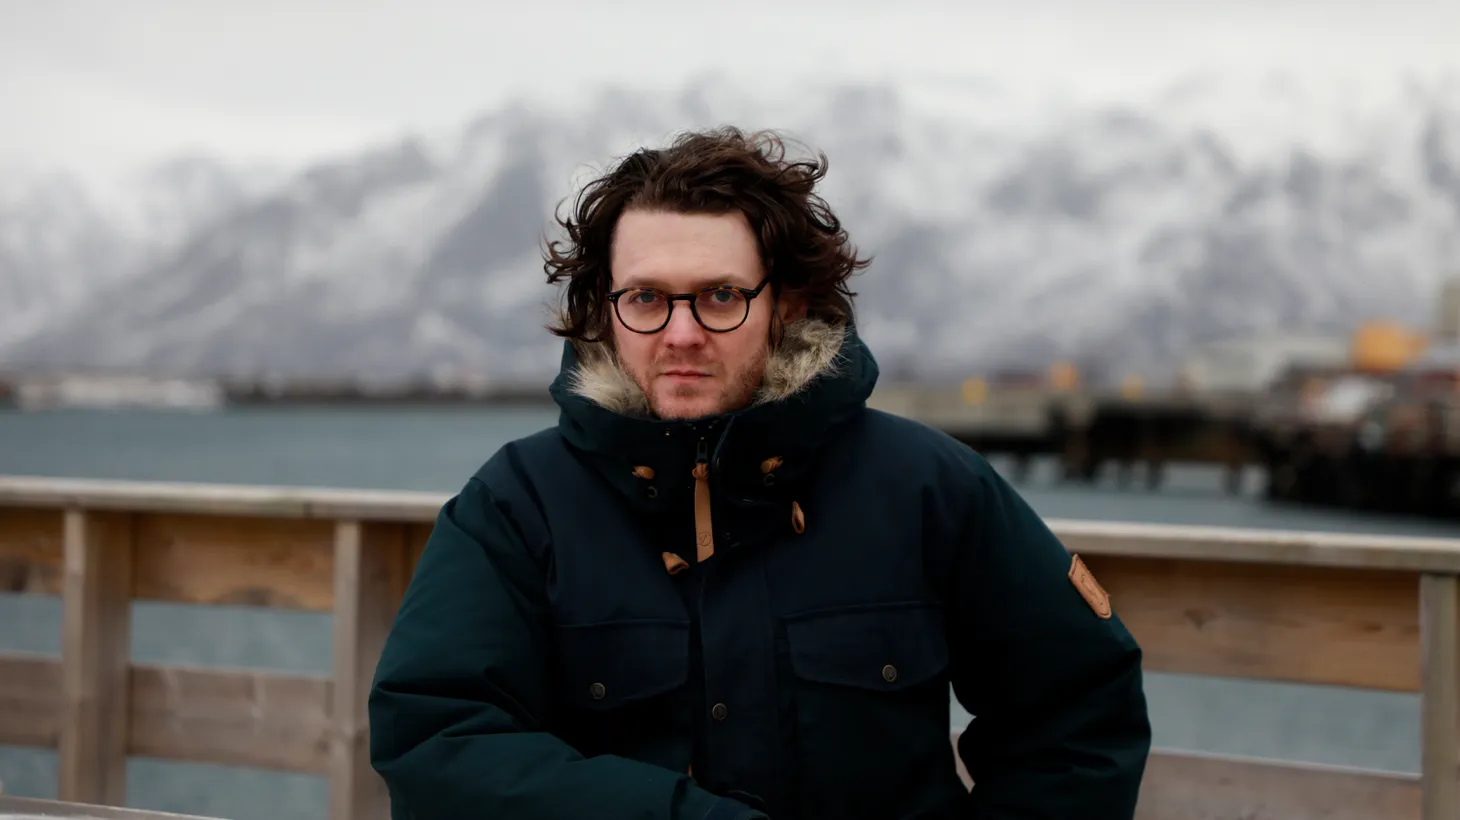 2019 started out as a year full of optimism for Zach Condon, best known by his moniker Beirut . But after suffering from persistent throat issues, Condon was unsure of his musical future.